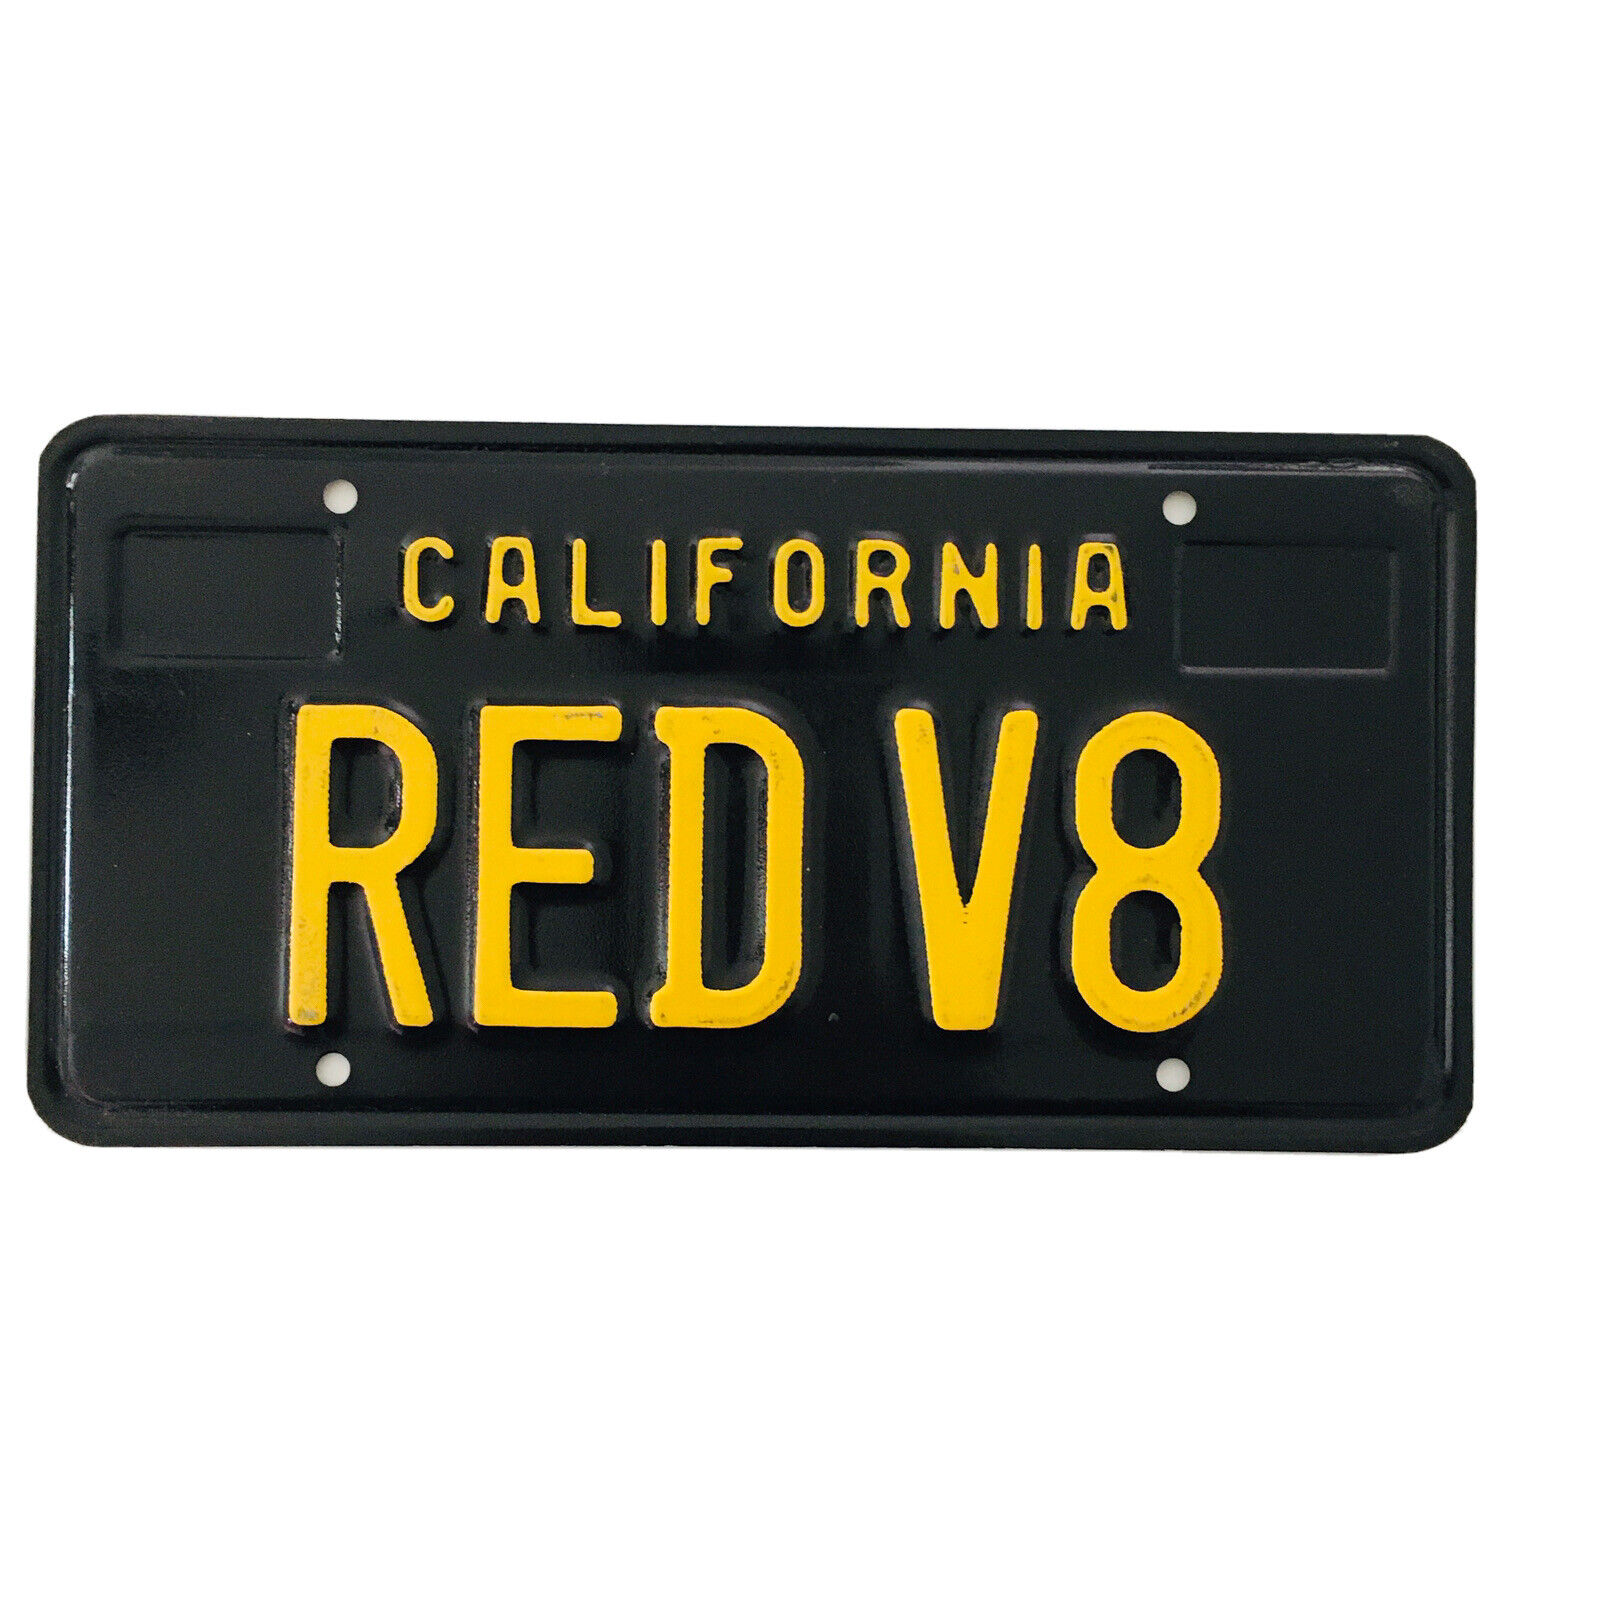 Black California Legacy License Plate Authentic original Red V8 DMV Issued Nice